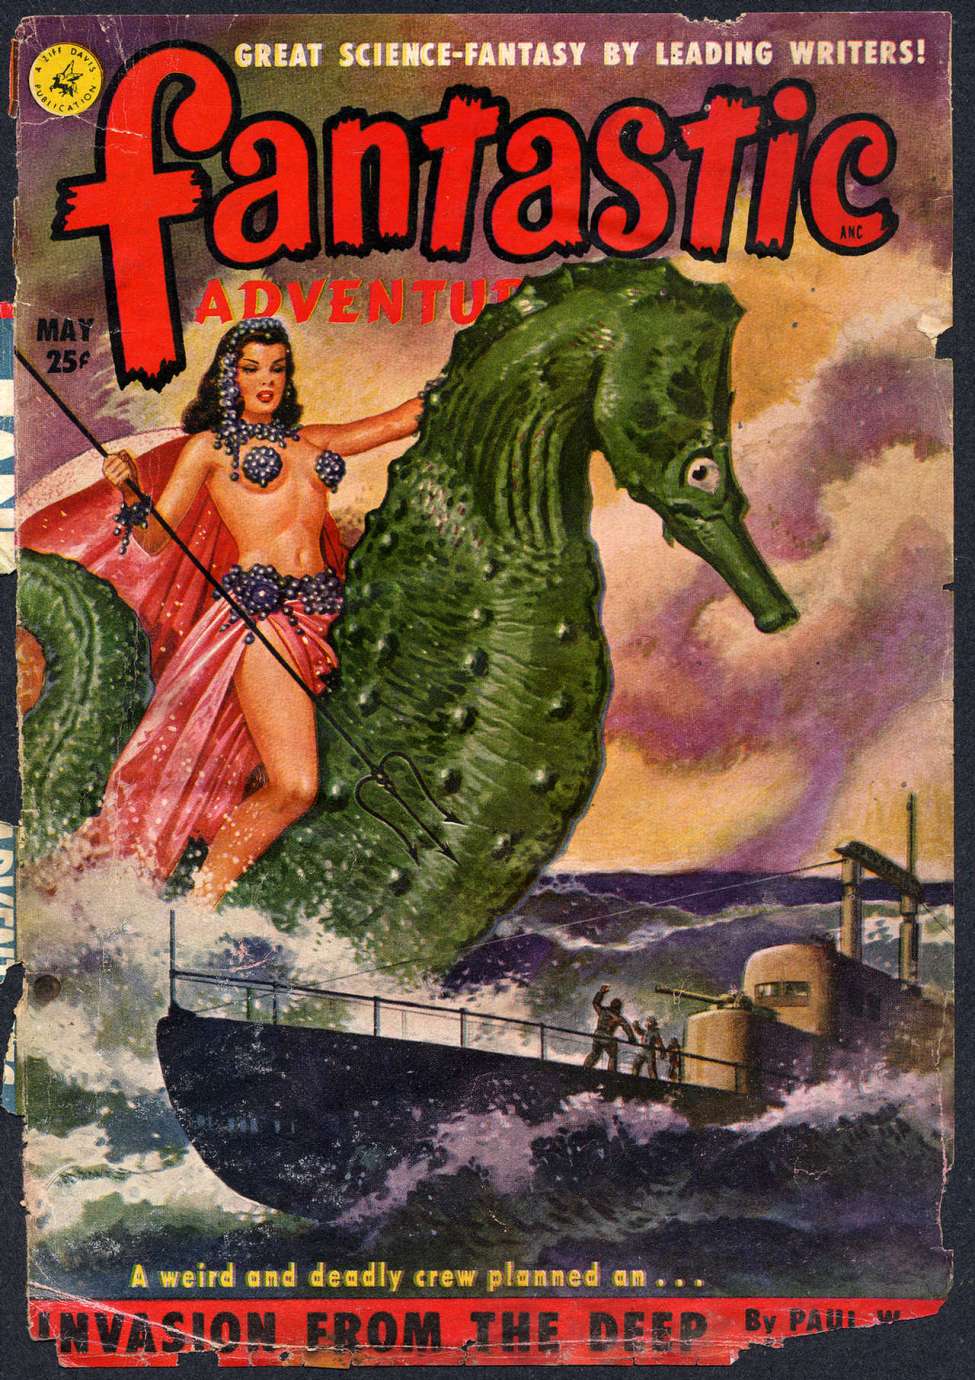 Comic Book Cover For Fantastic Adventures v13 5 - Invasion from the Deep - Paul W. Fairman